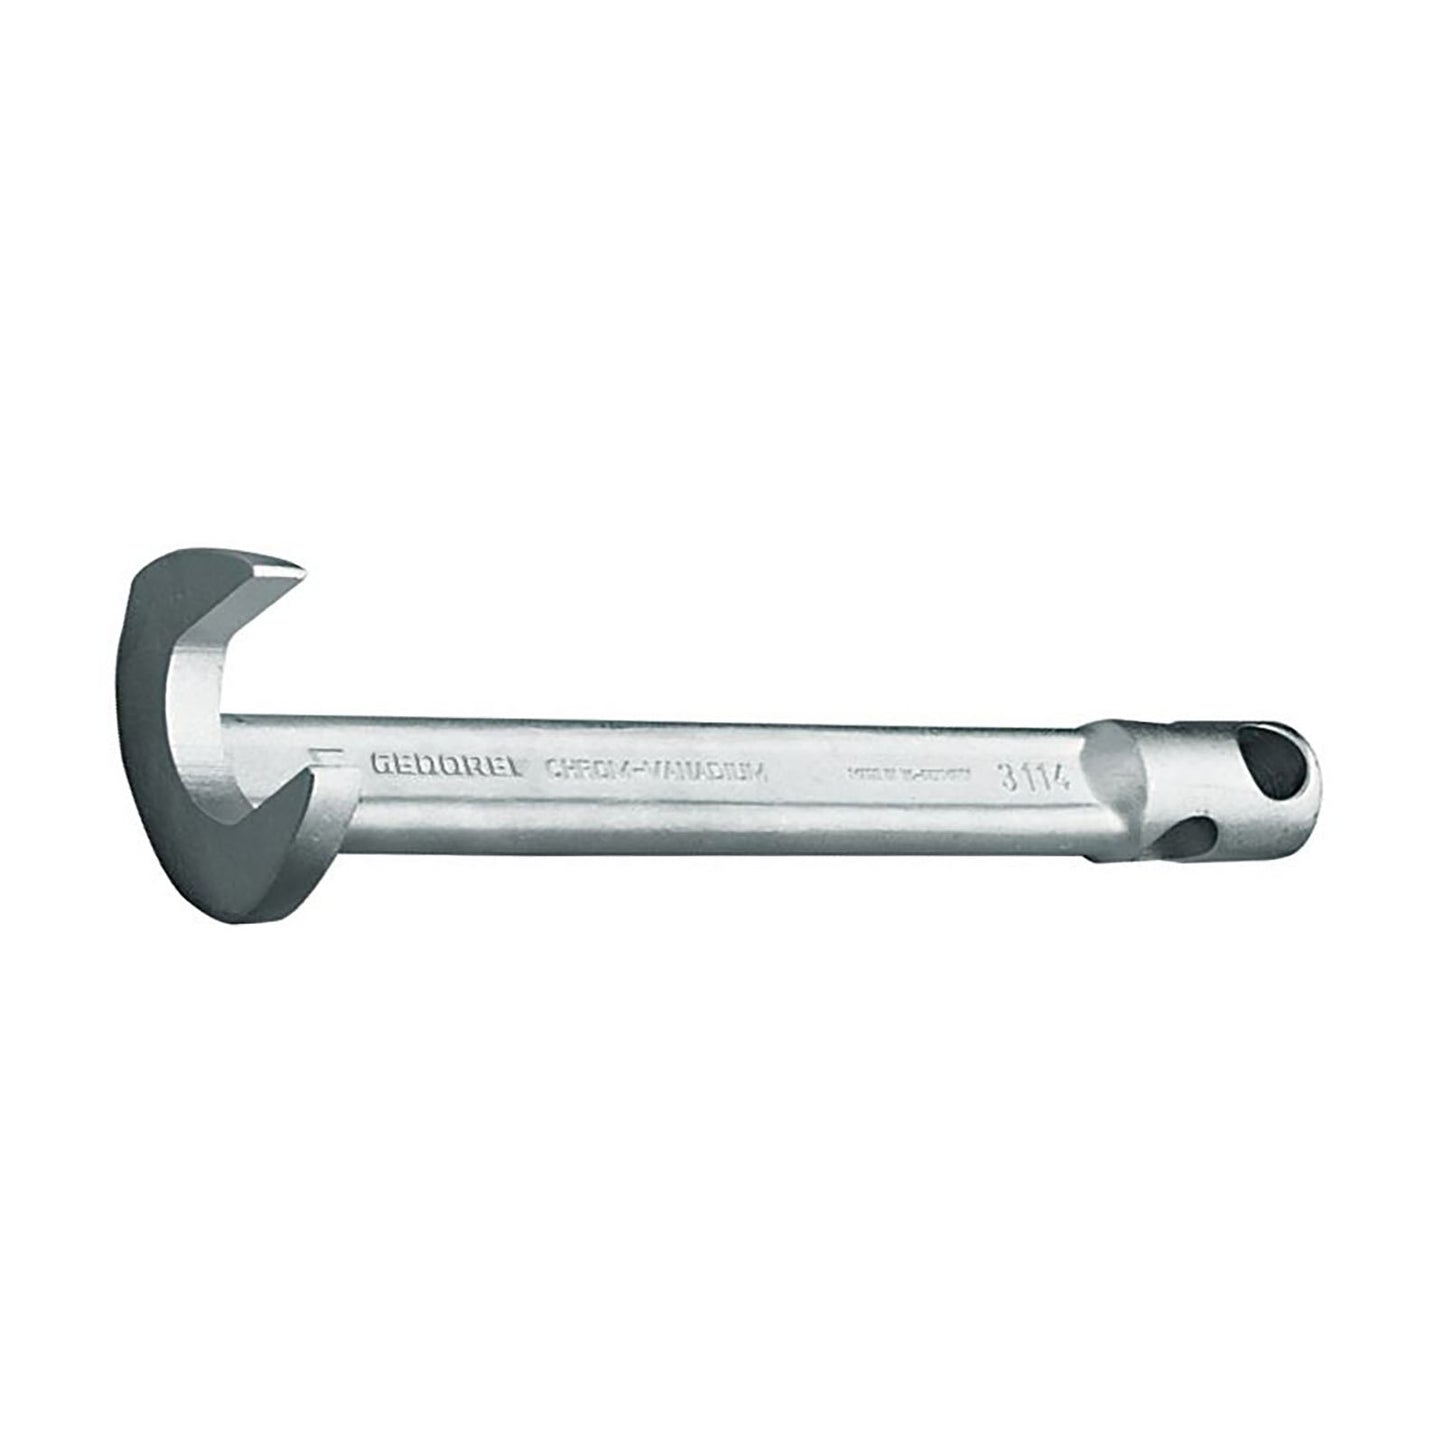 GEDORE 3114 22 - Forked Foot Wrench, 22mm (6670560)